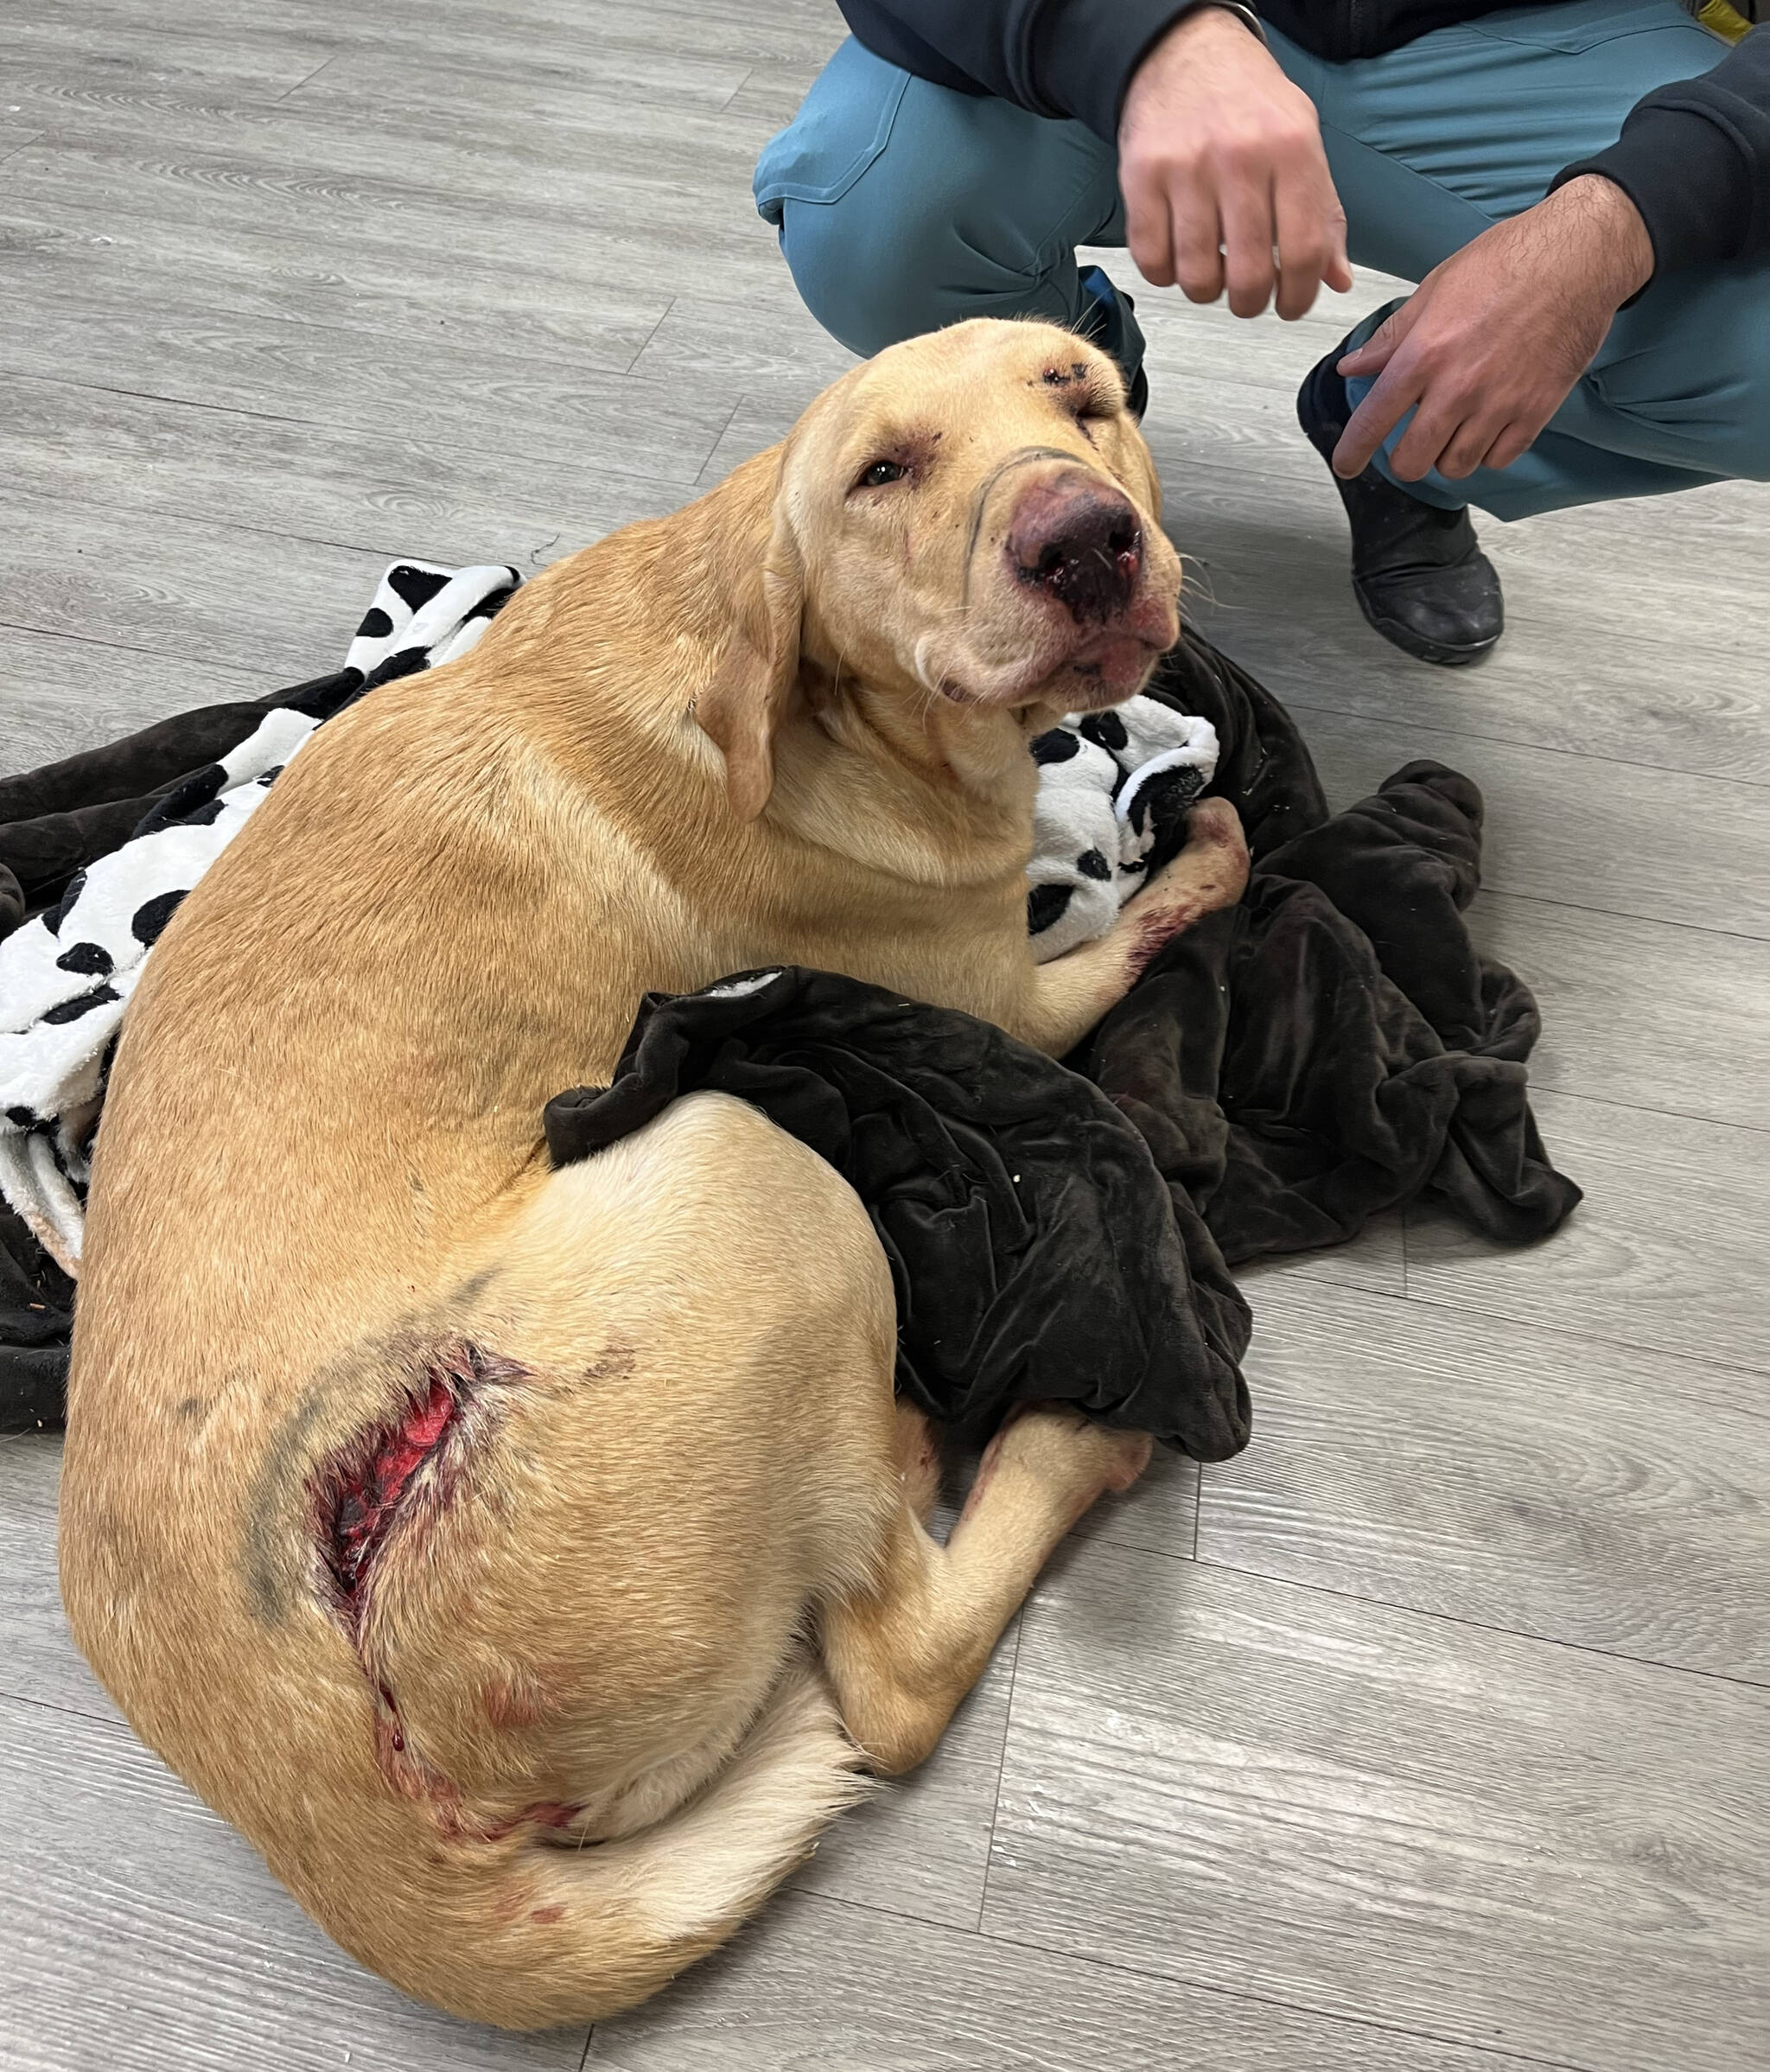 As of Jan. 17, 2022, two-year-old Daisy was in the care of the Chilliwack SPCA after she was hit by a car and suffered extensive injuries. (BCSPCA photo)